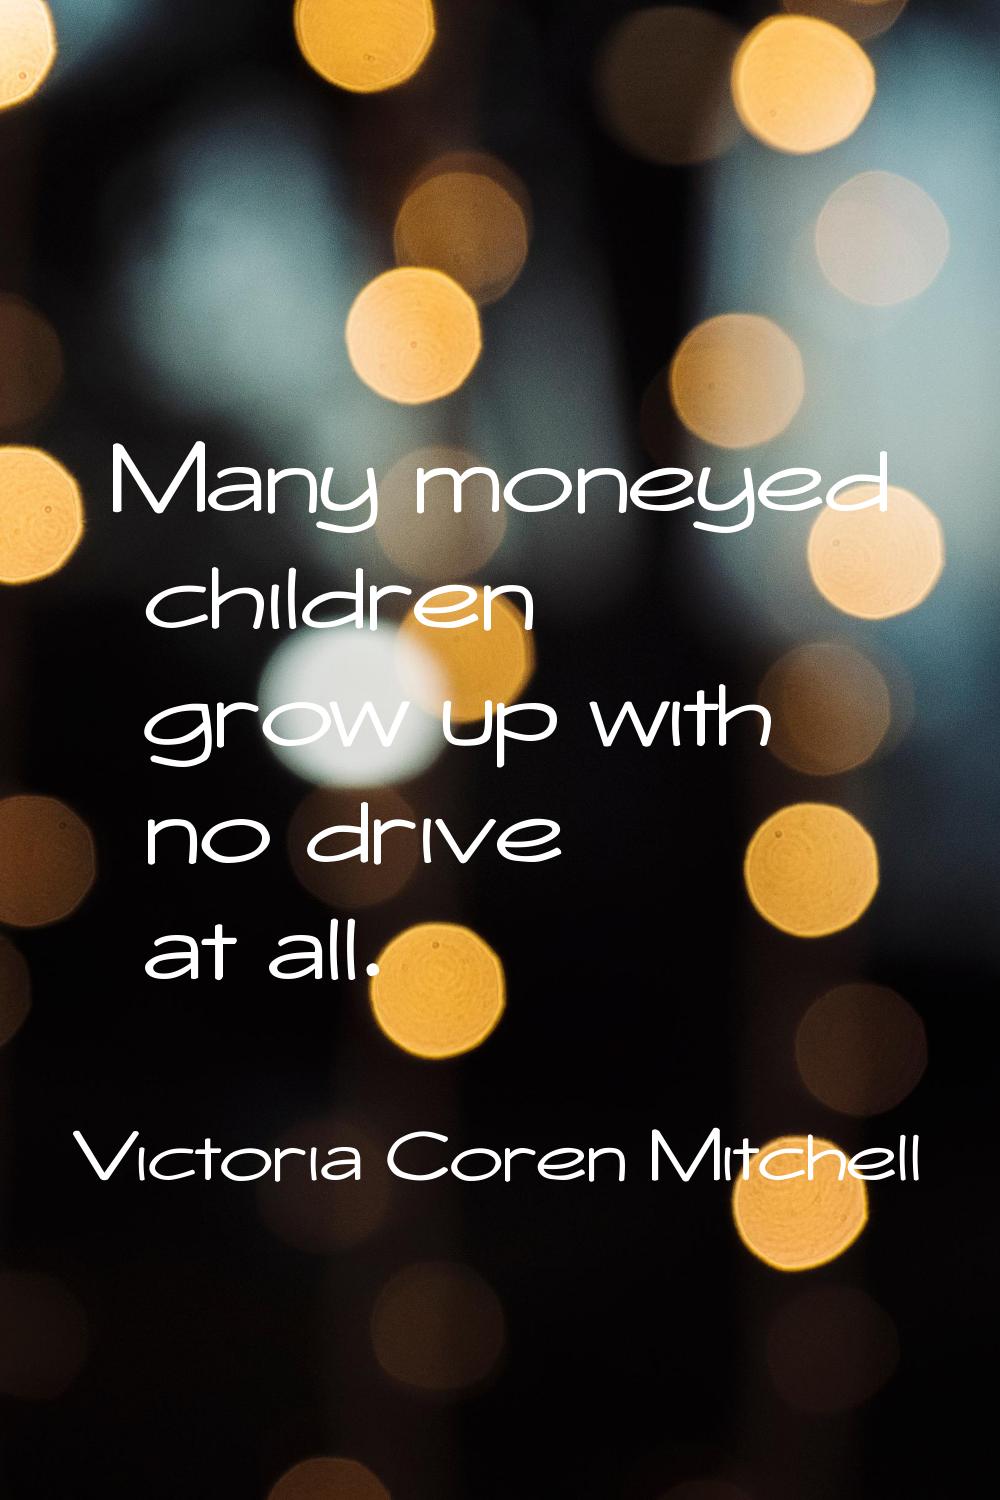 Many moneyed children grow up with no drive at all.